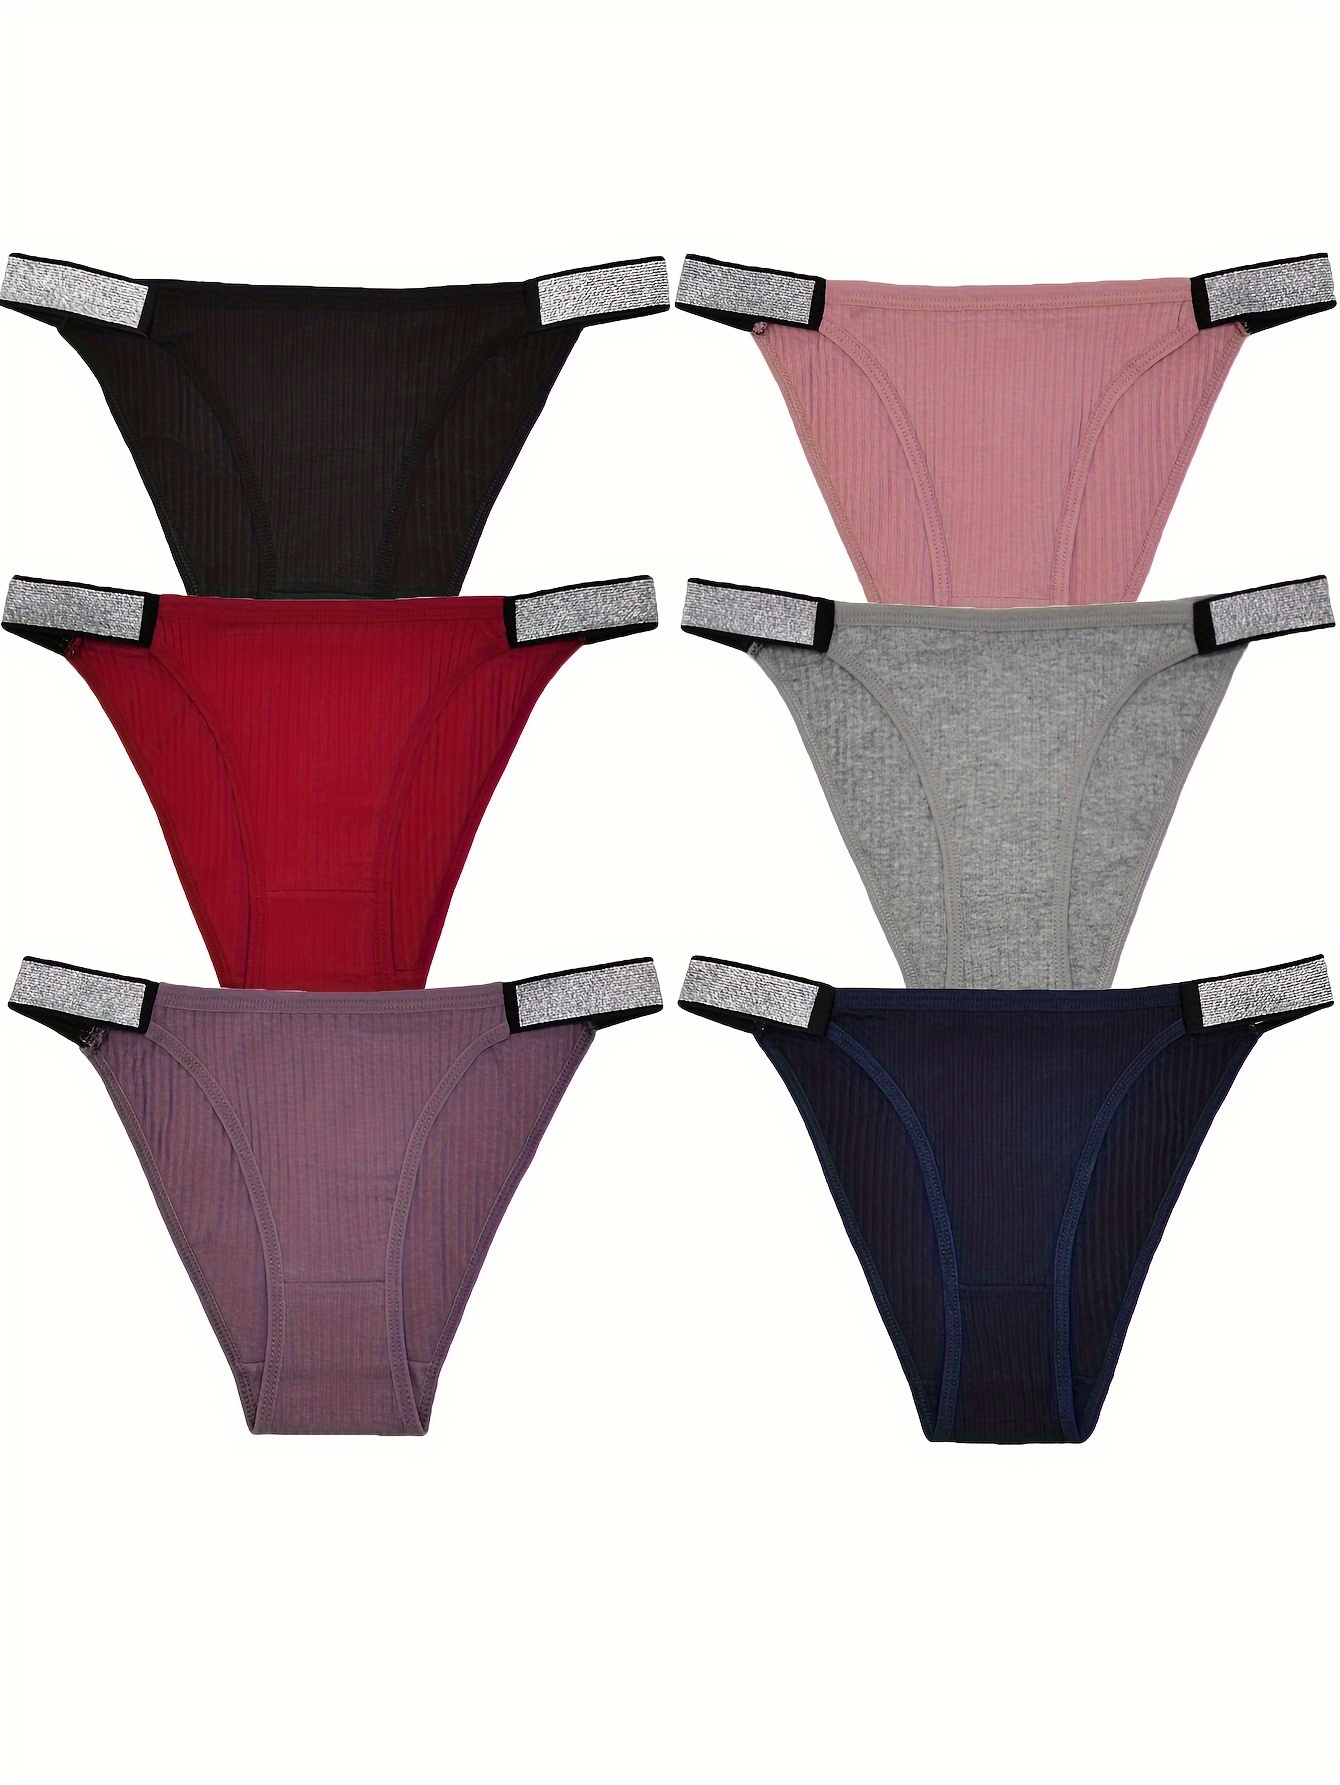 6pcs Solid Ribbed Briefs, Comfy & Breathable Stretchy Intimates Panties,  Women's Lingerie & Underwear